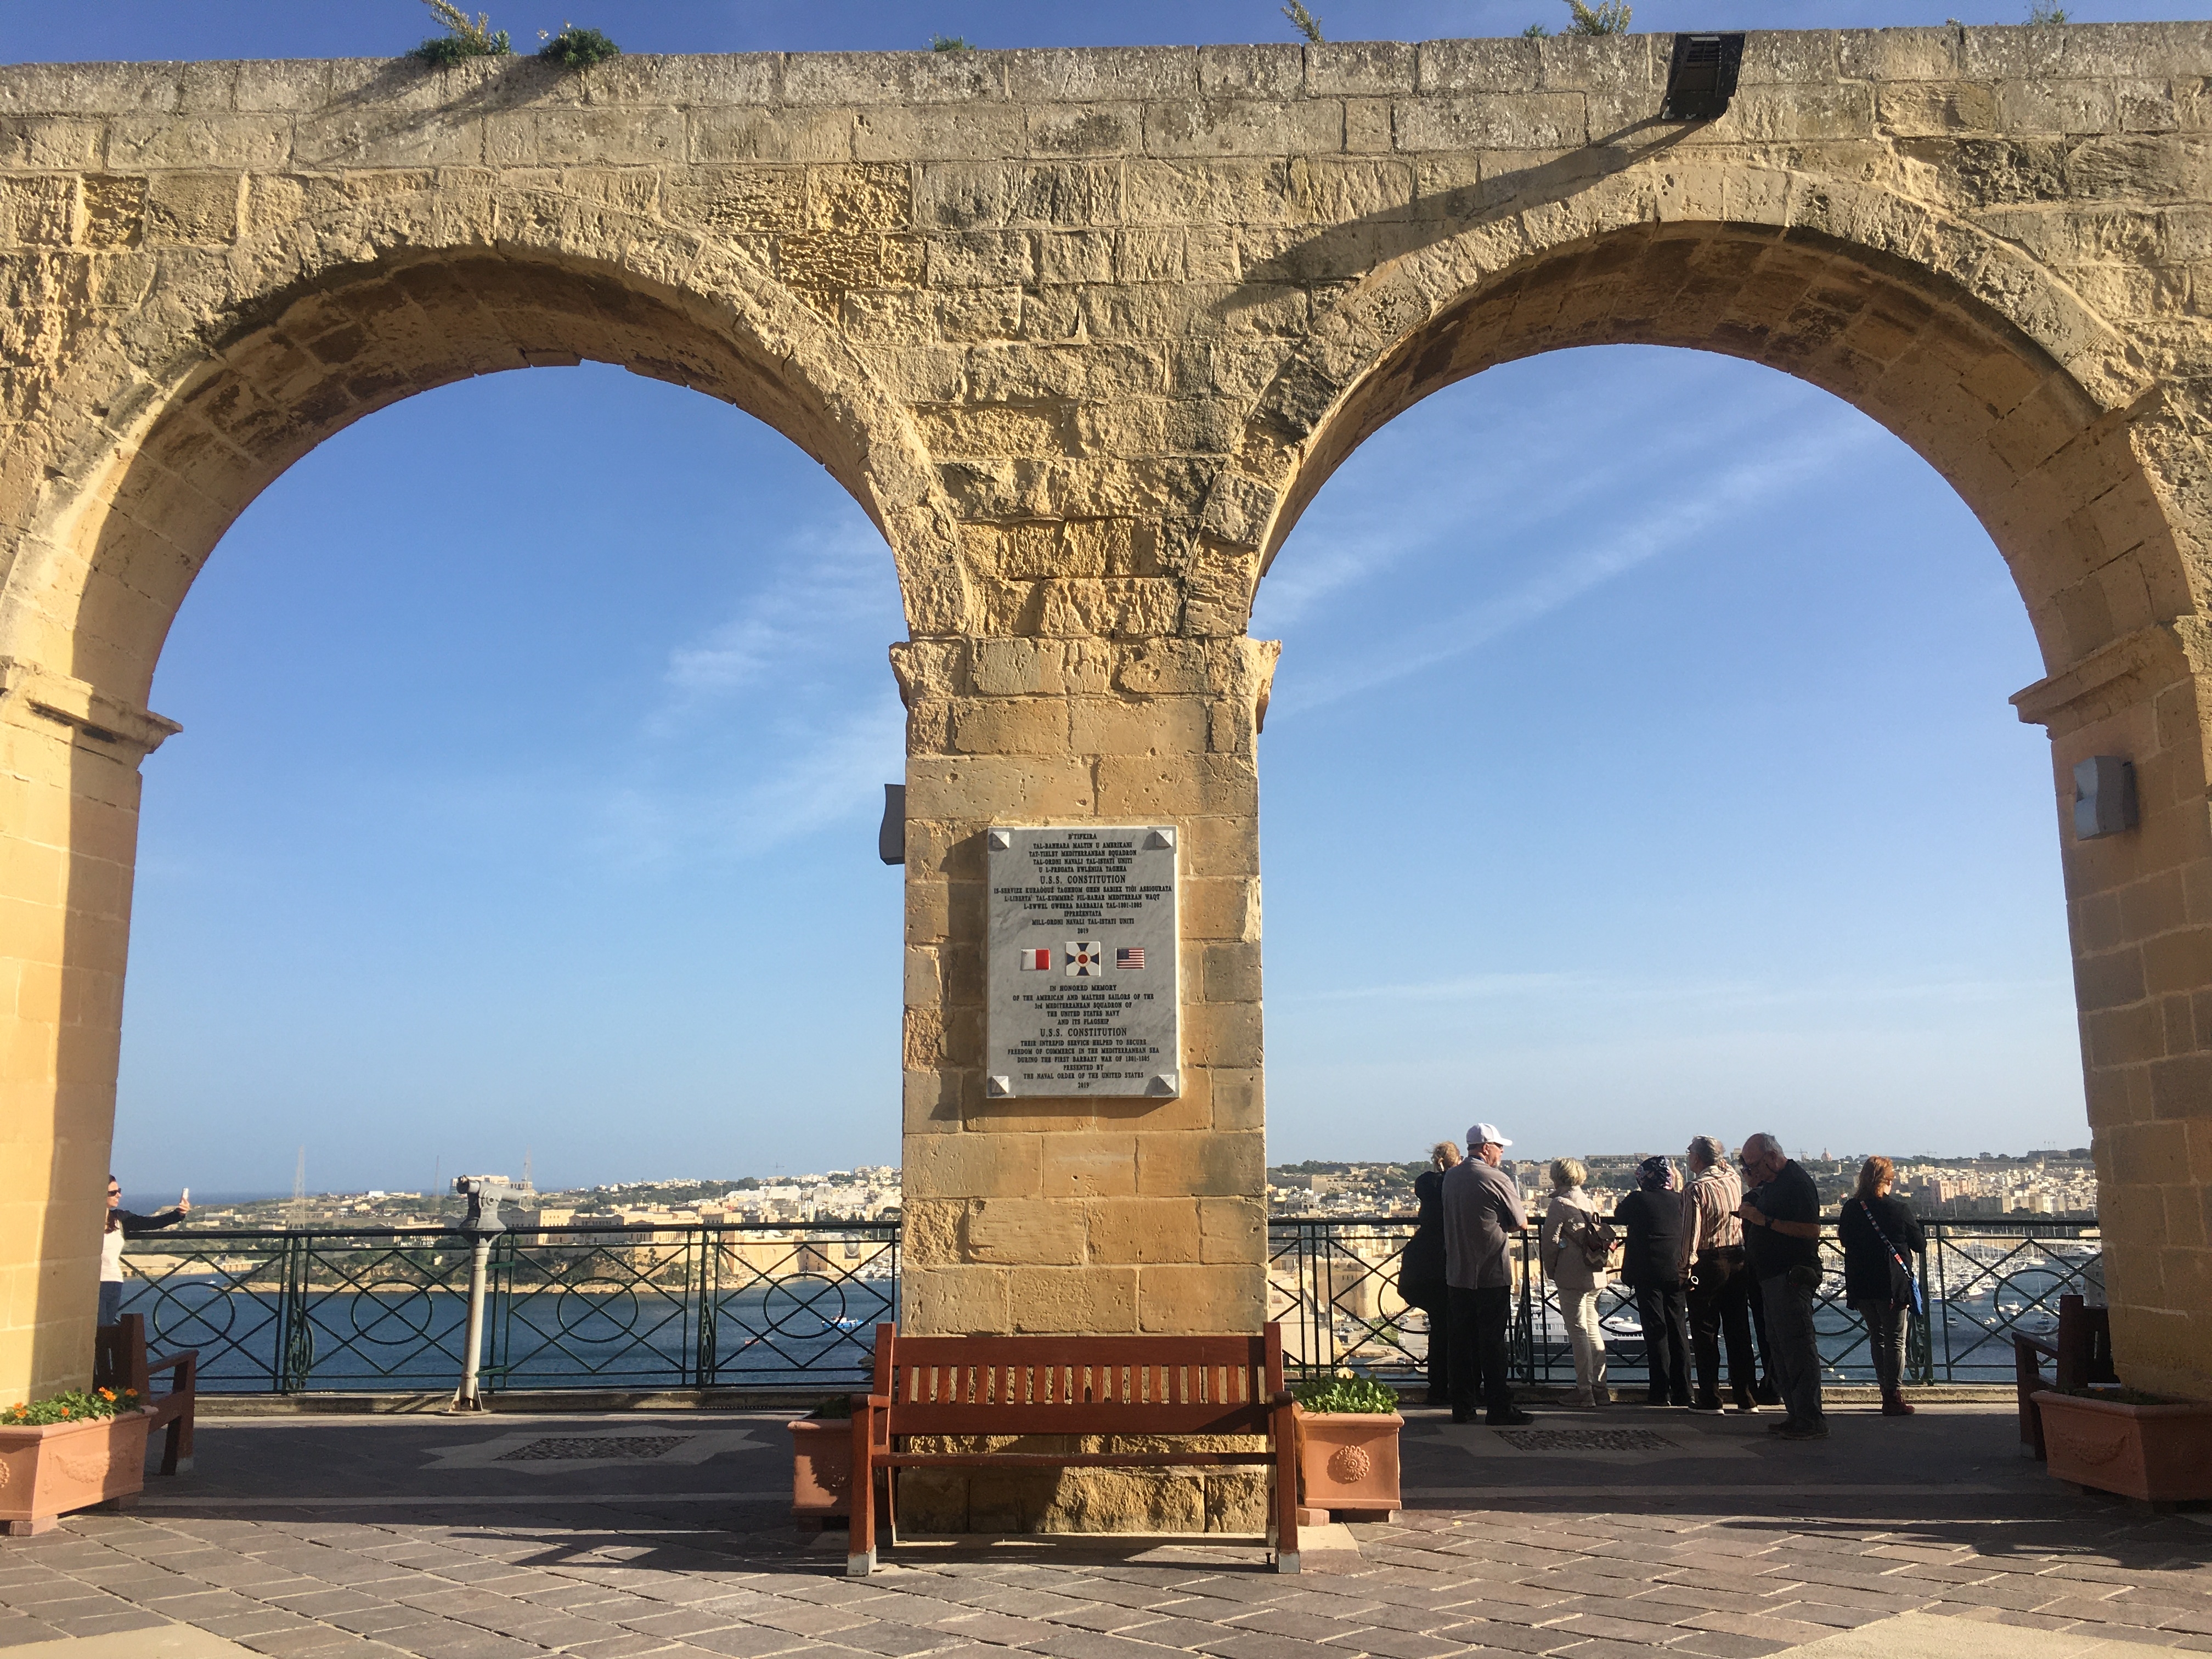 The marker is on this archway of Upper Barrakka Gardens overlooking the Grand Harbour